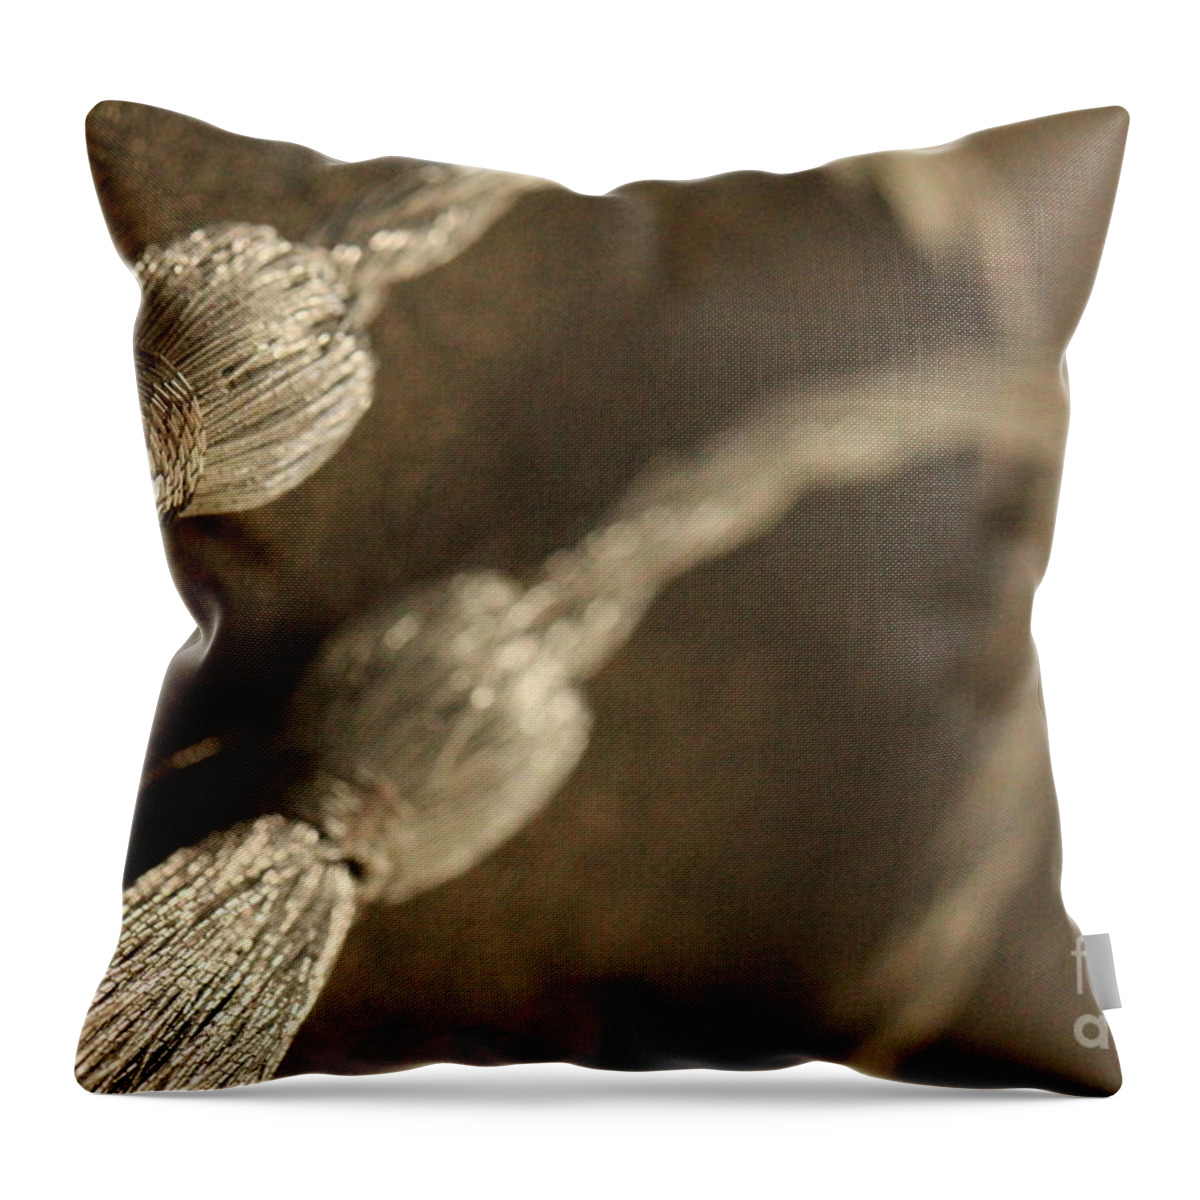  Bind Throw Pillow featuring the photograph Decorative Tassel by Amanda Mohler